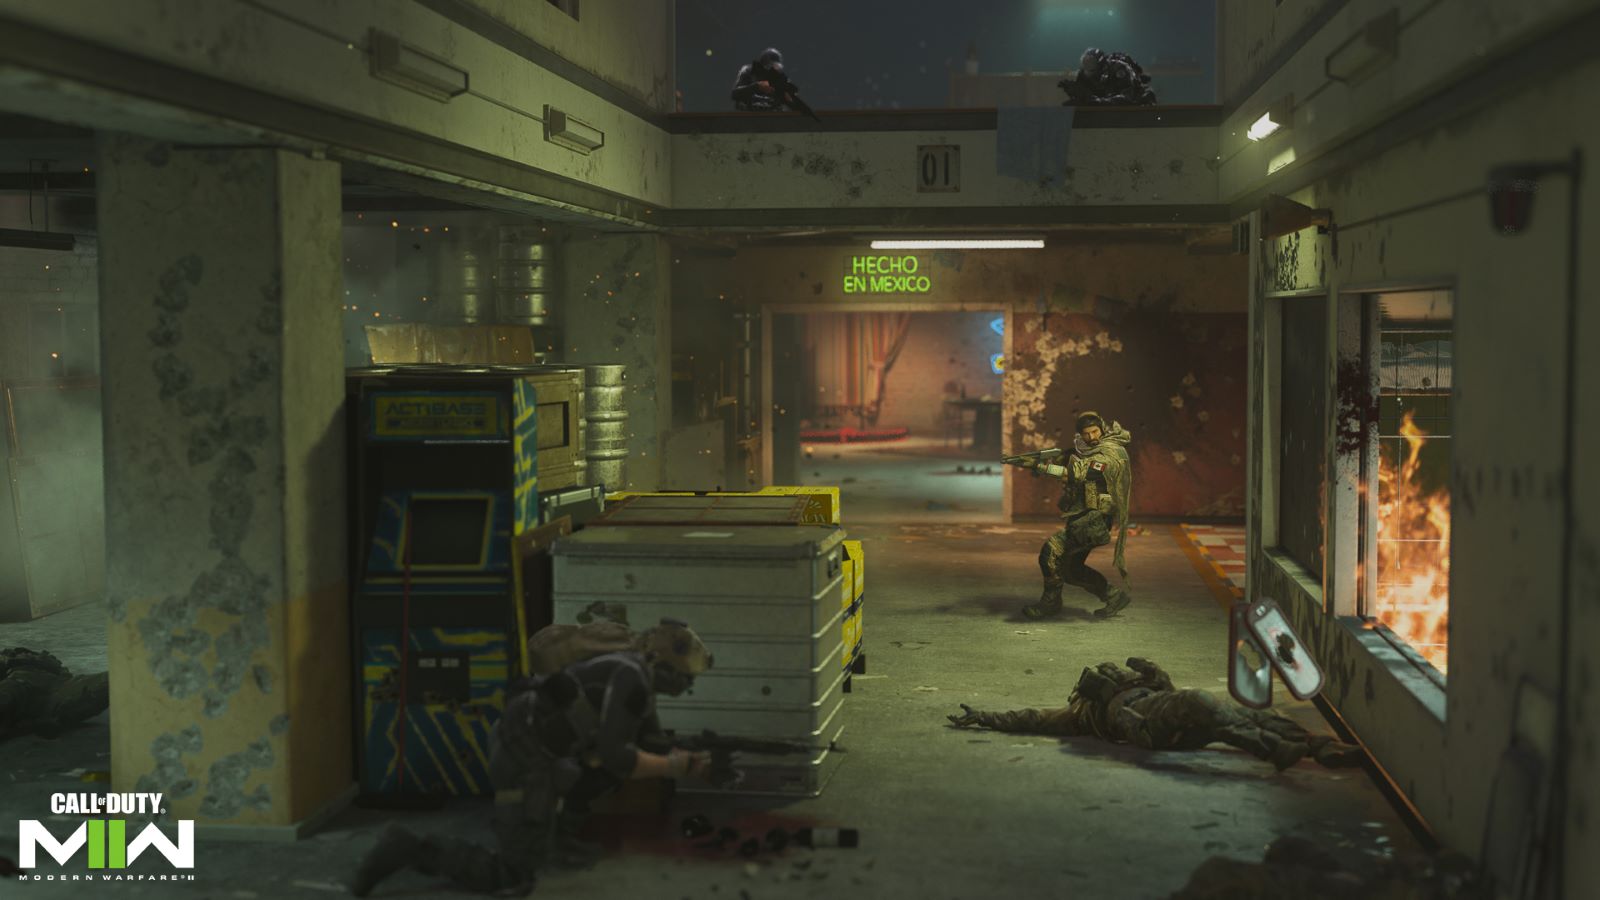 Call of Duty Vanguard gets PC trailer, specs, file size and pre